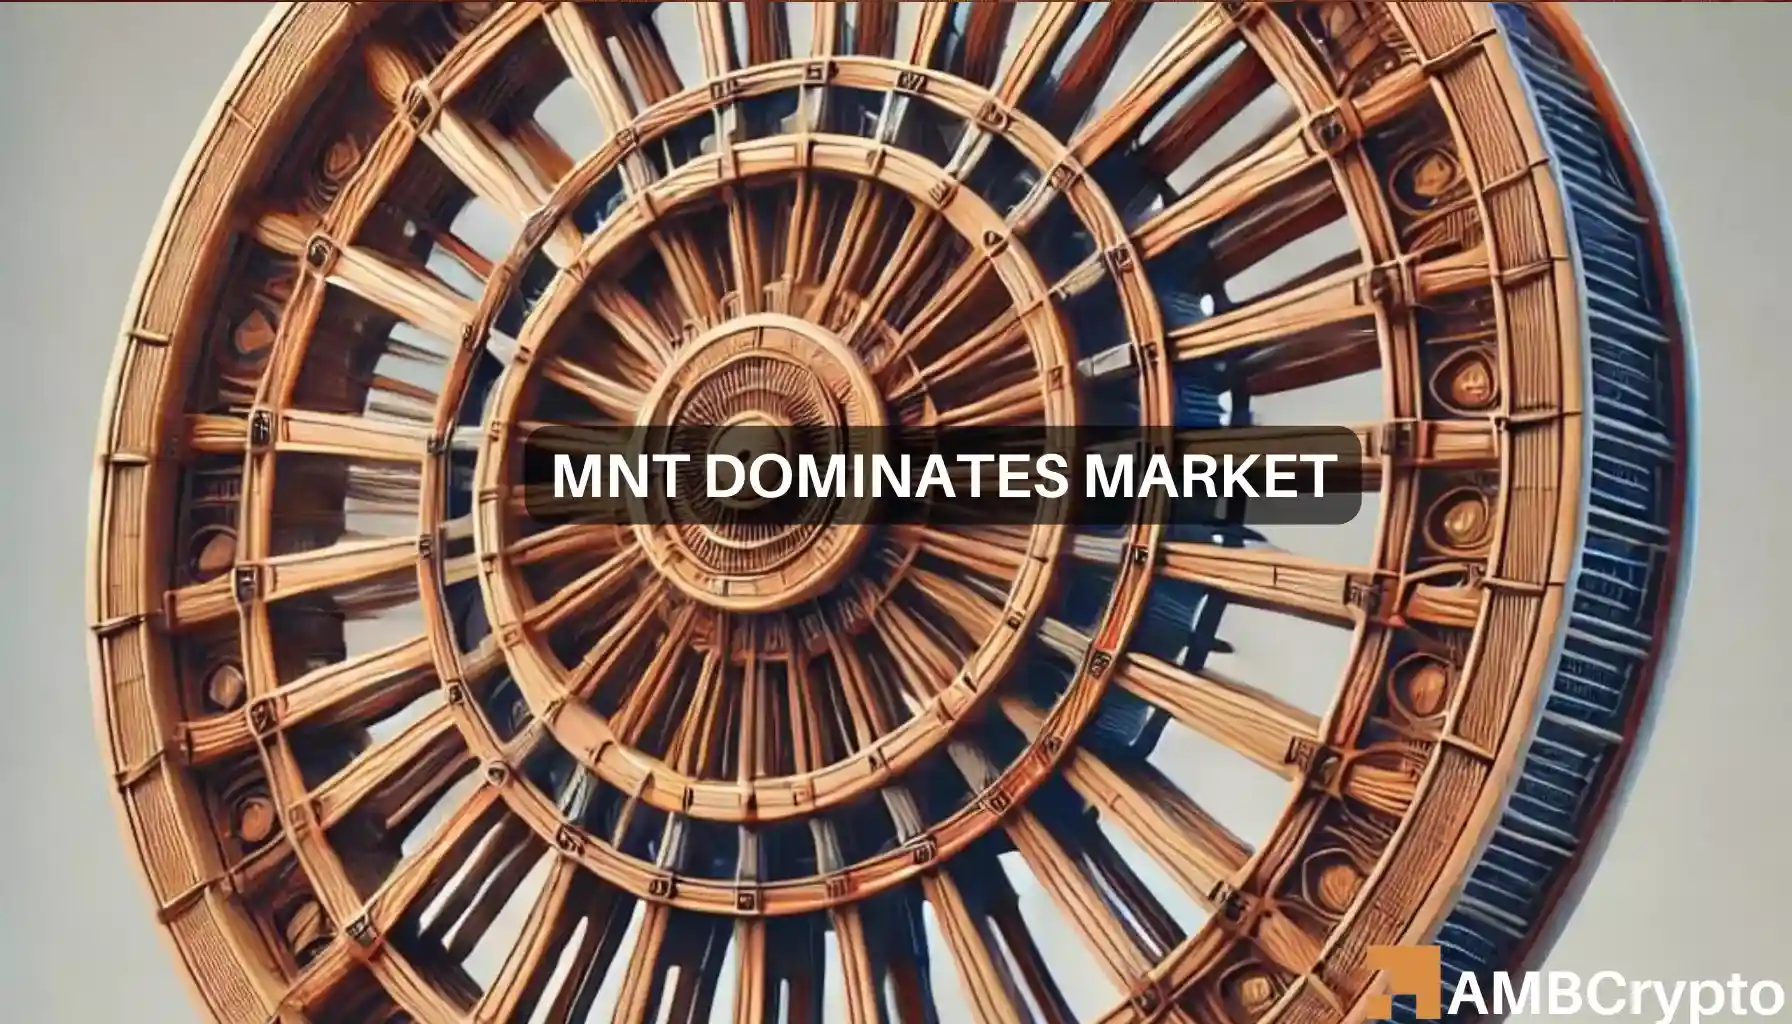 Mantle token sets new ATH with stellar 7% gain: What’s next for MNT?